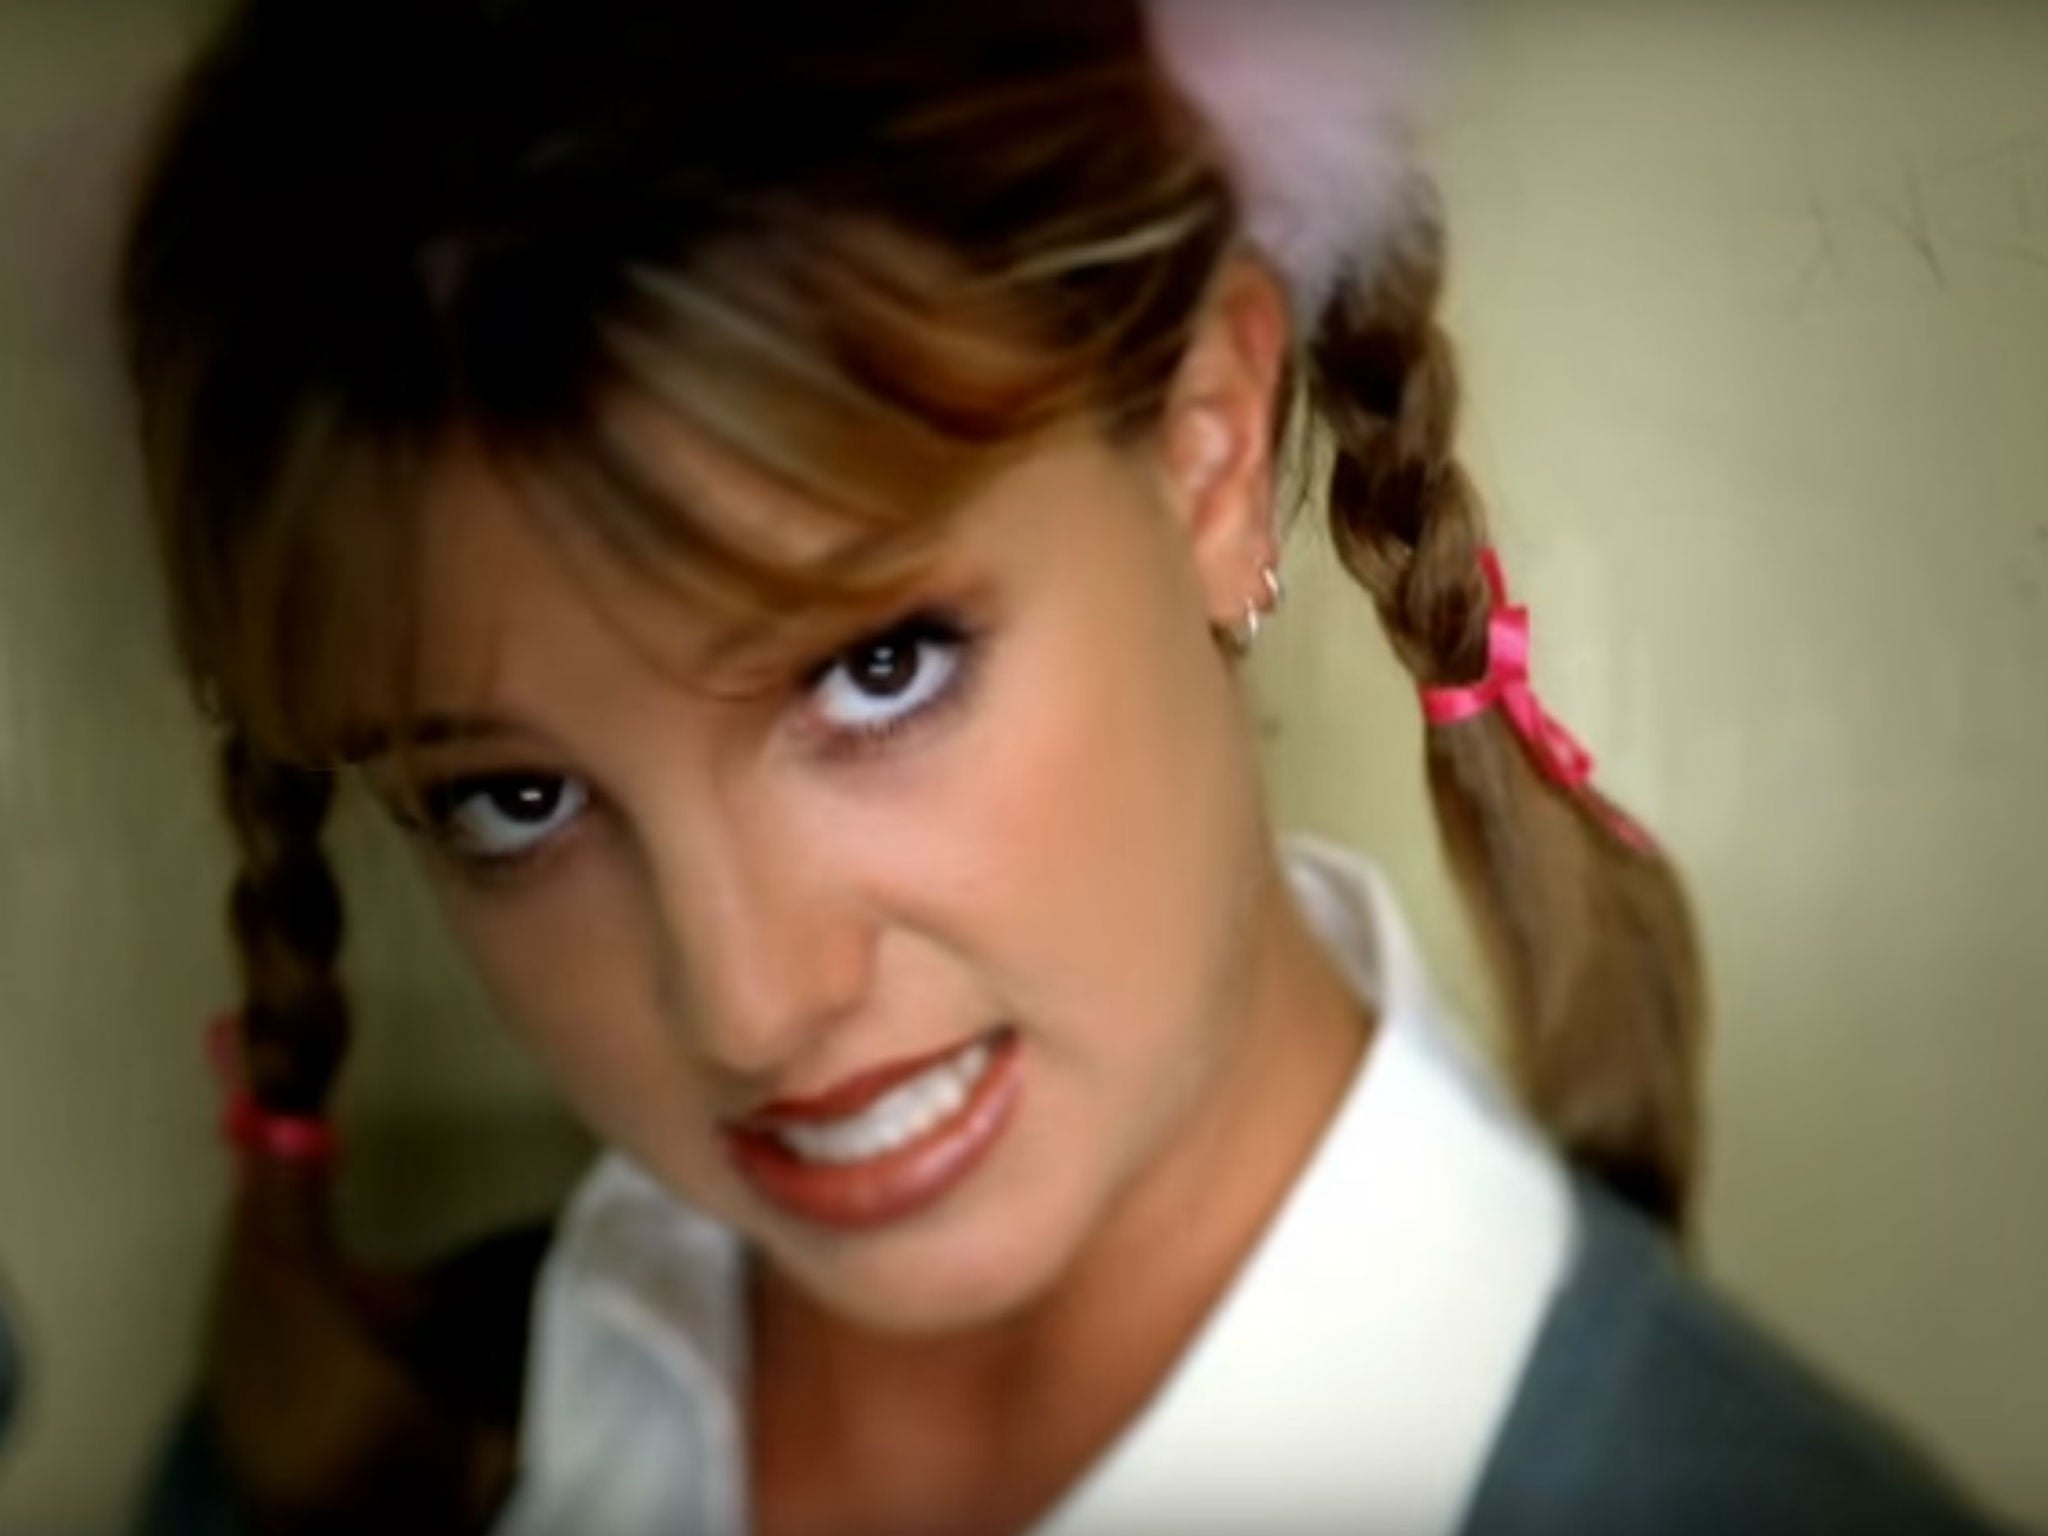 Britney Spears dressed as a schoolgirl for her iconic '...Baby One More Time' music video